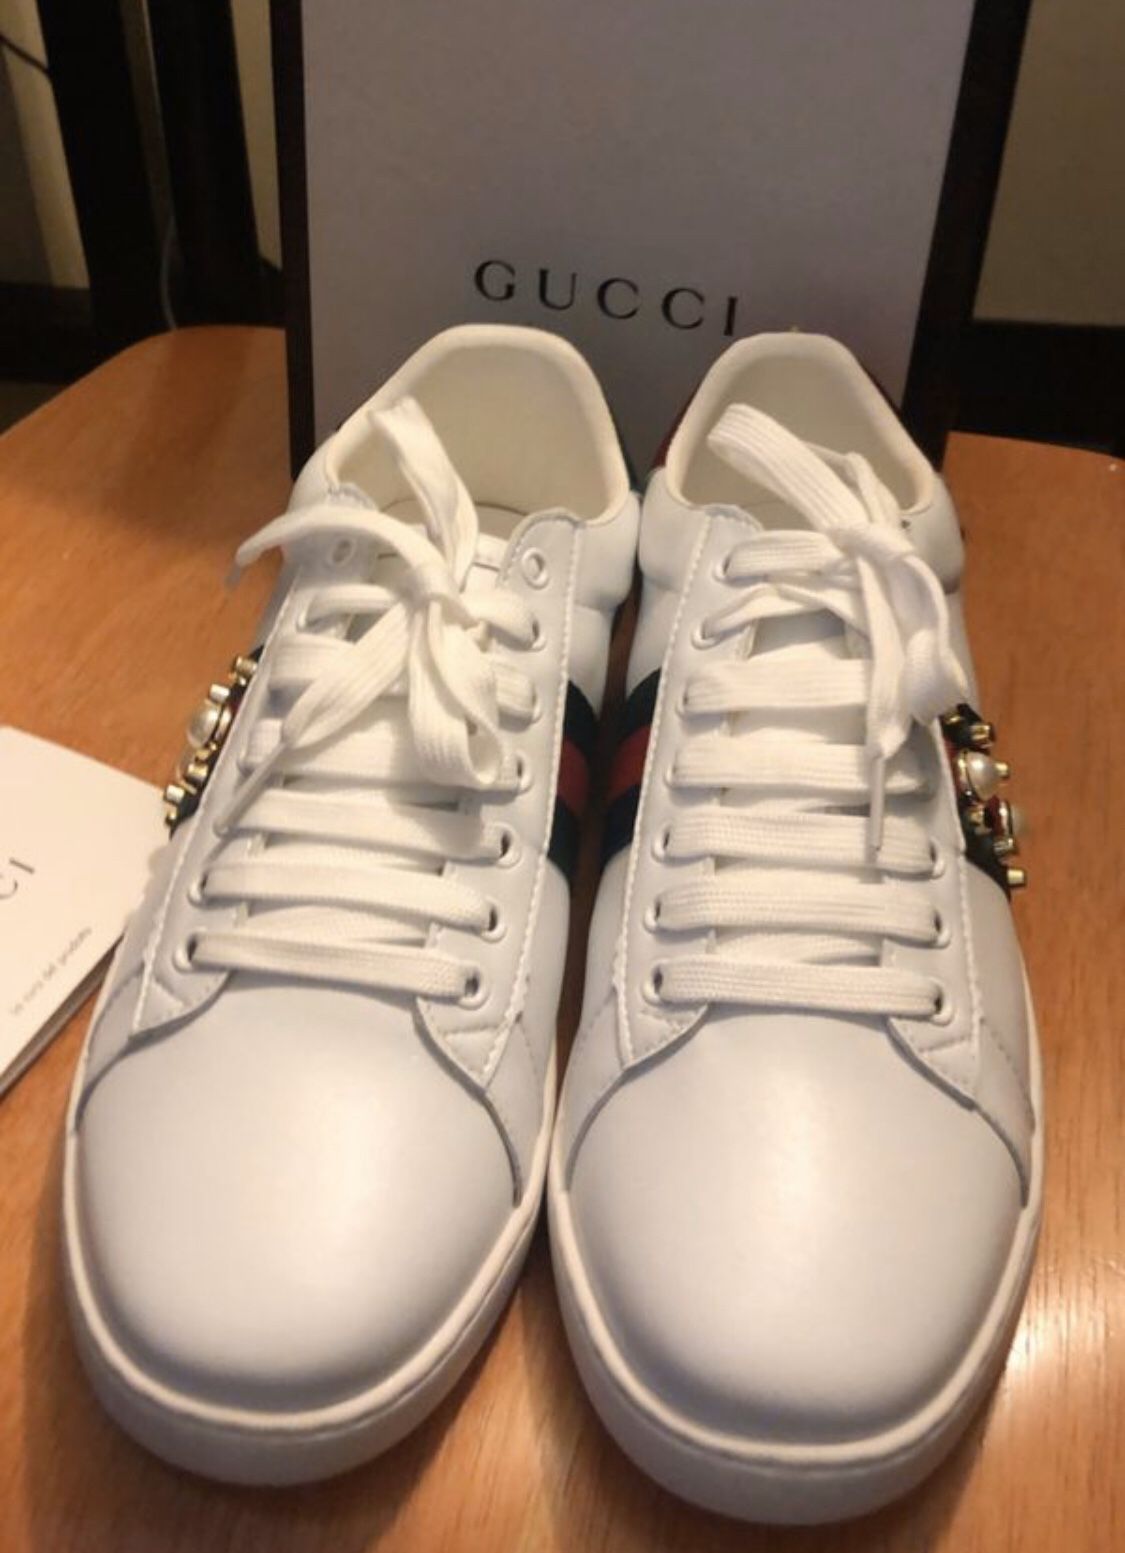 Gucci sneakers,8 US